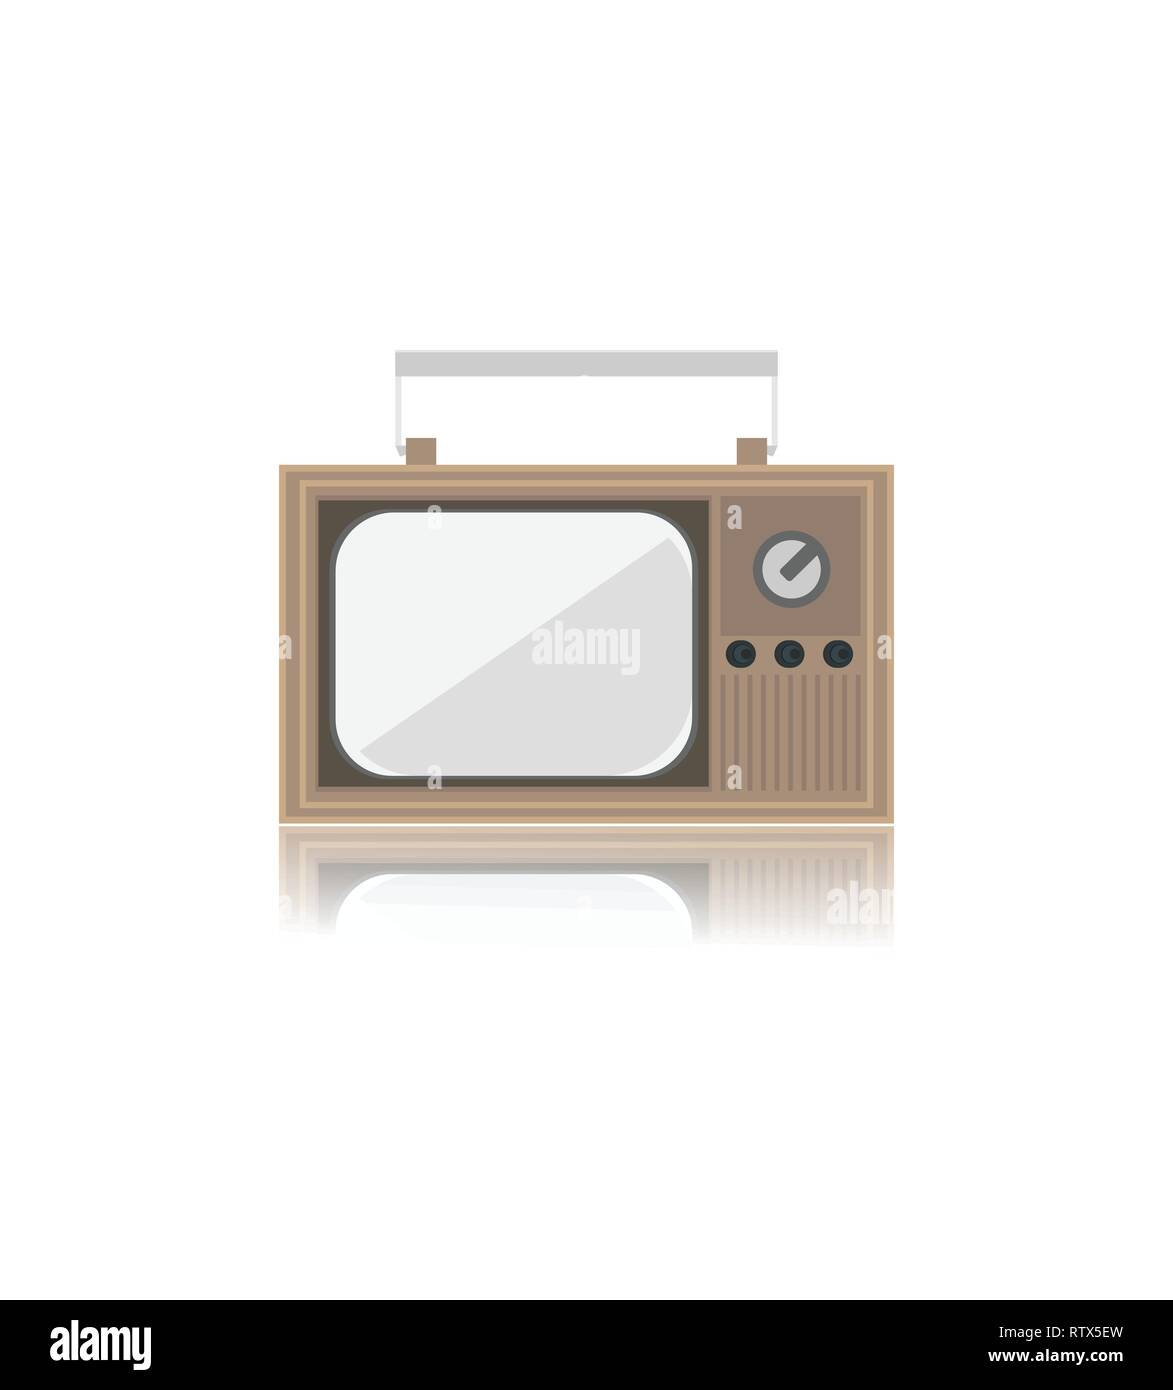 Retro old vintage television flat design isolated on white background. Stock Vector